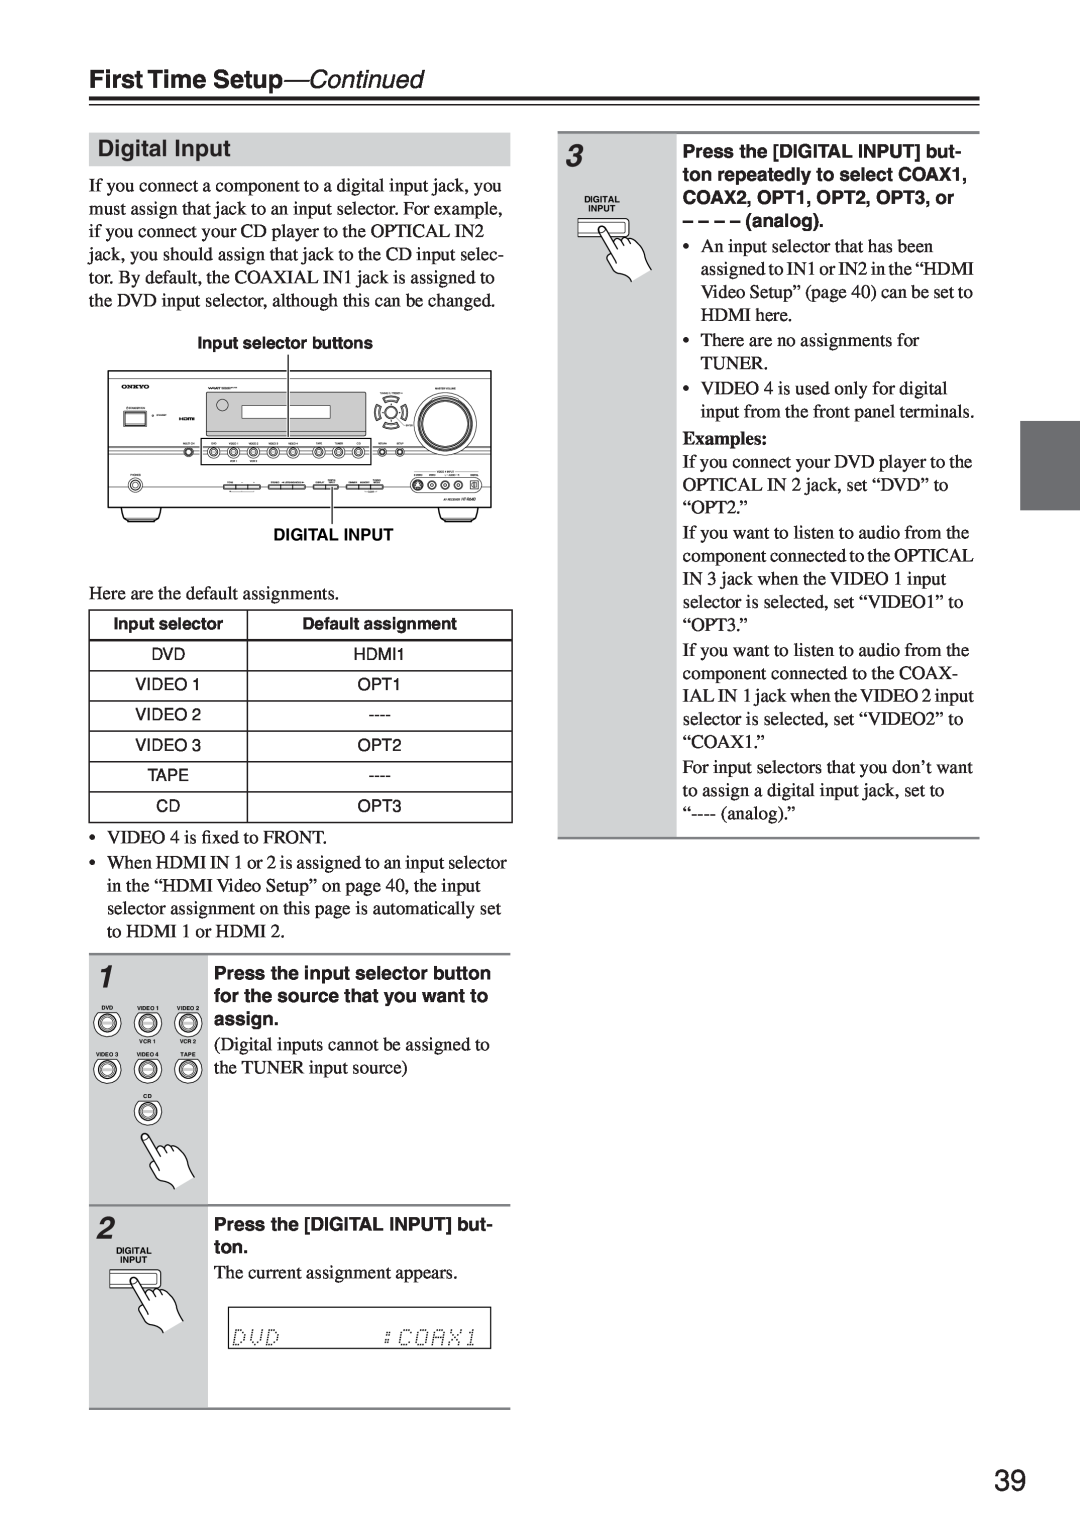 Onkyo HT-R640 First Time Setup-Continued, Digital Input, Digital inputs cannot be assigned to, the TUNER input source 